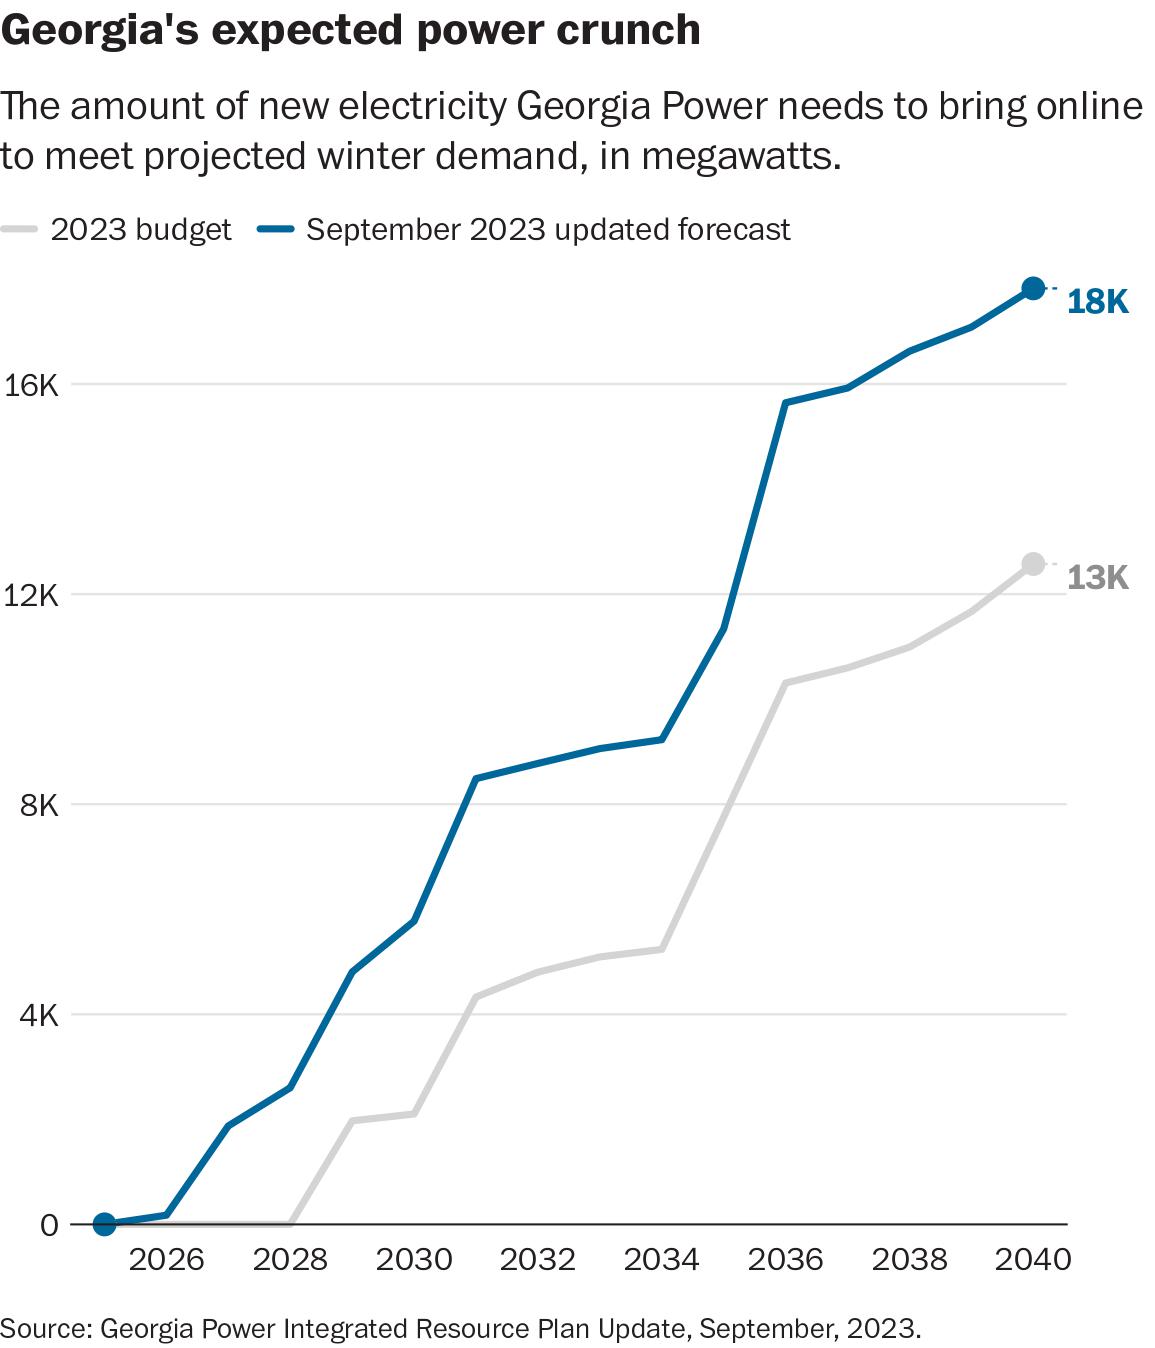 The amount of new electricity Georgia Power needs to bring online to meet projected winter demand, in megawatts.